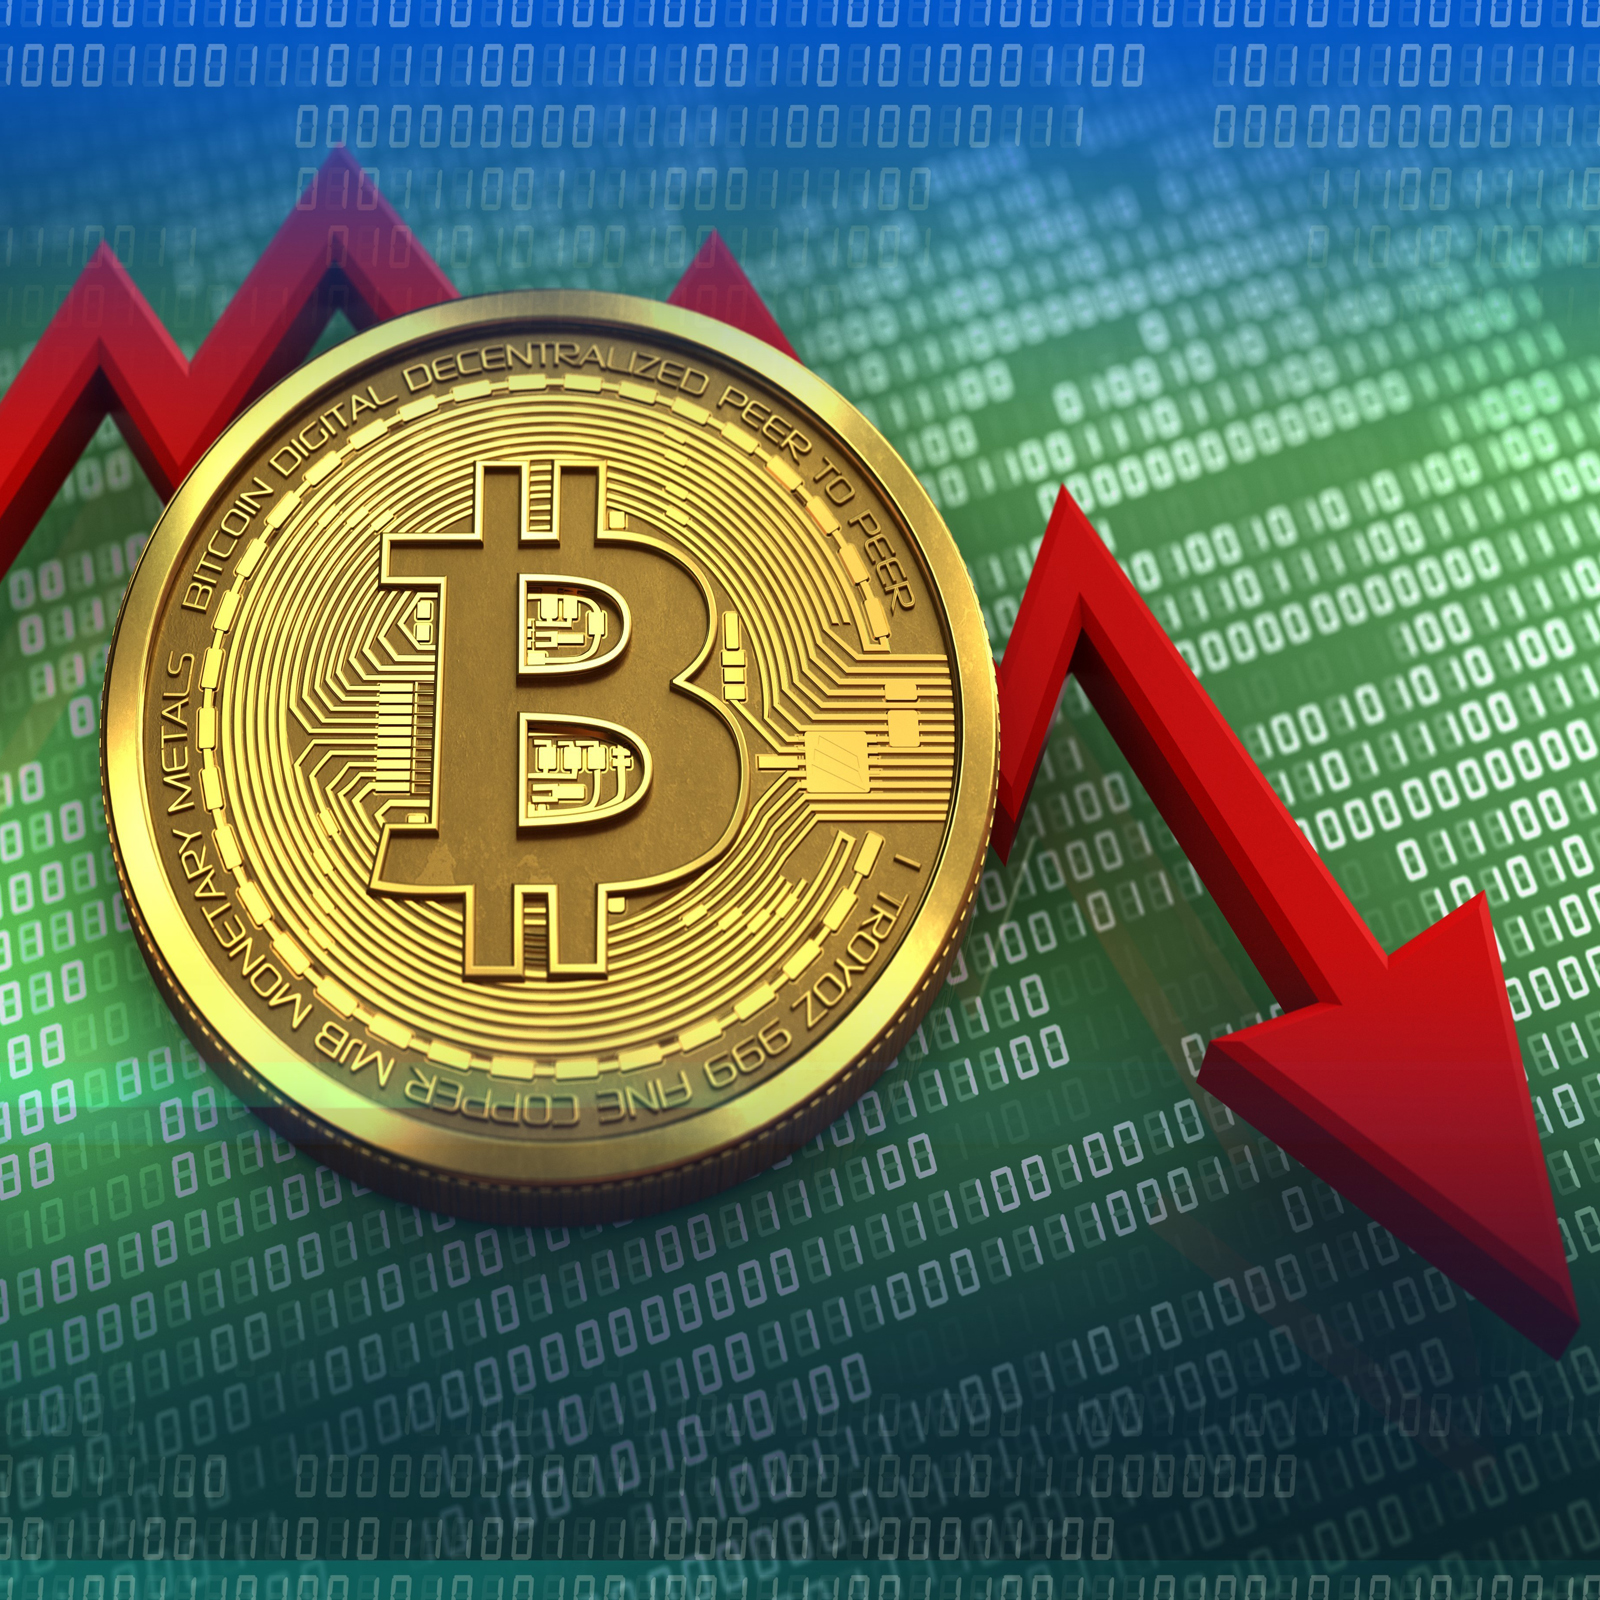 Markets Update: Cryptocurrency Price Trends Turn from Bullish to Bearish